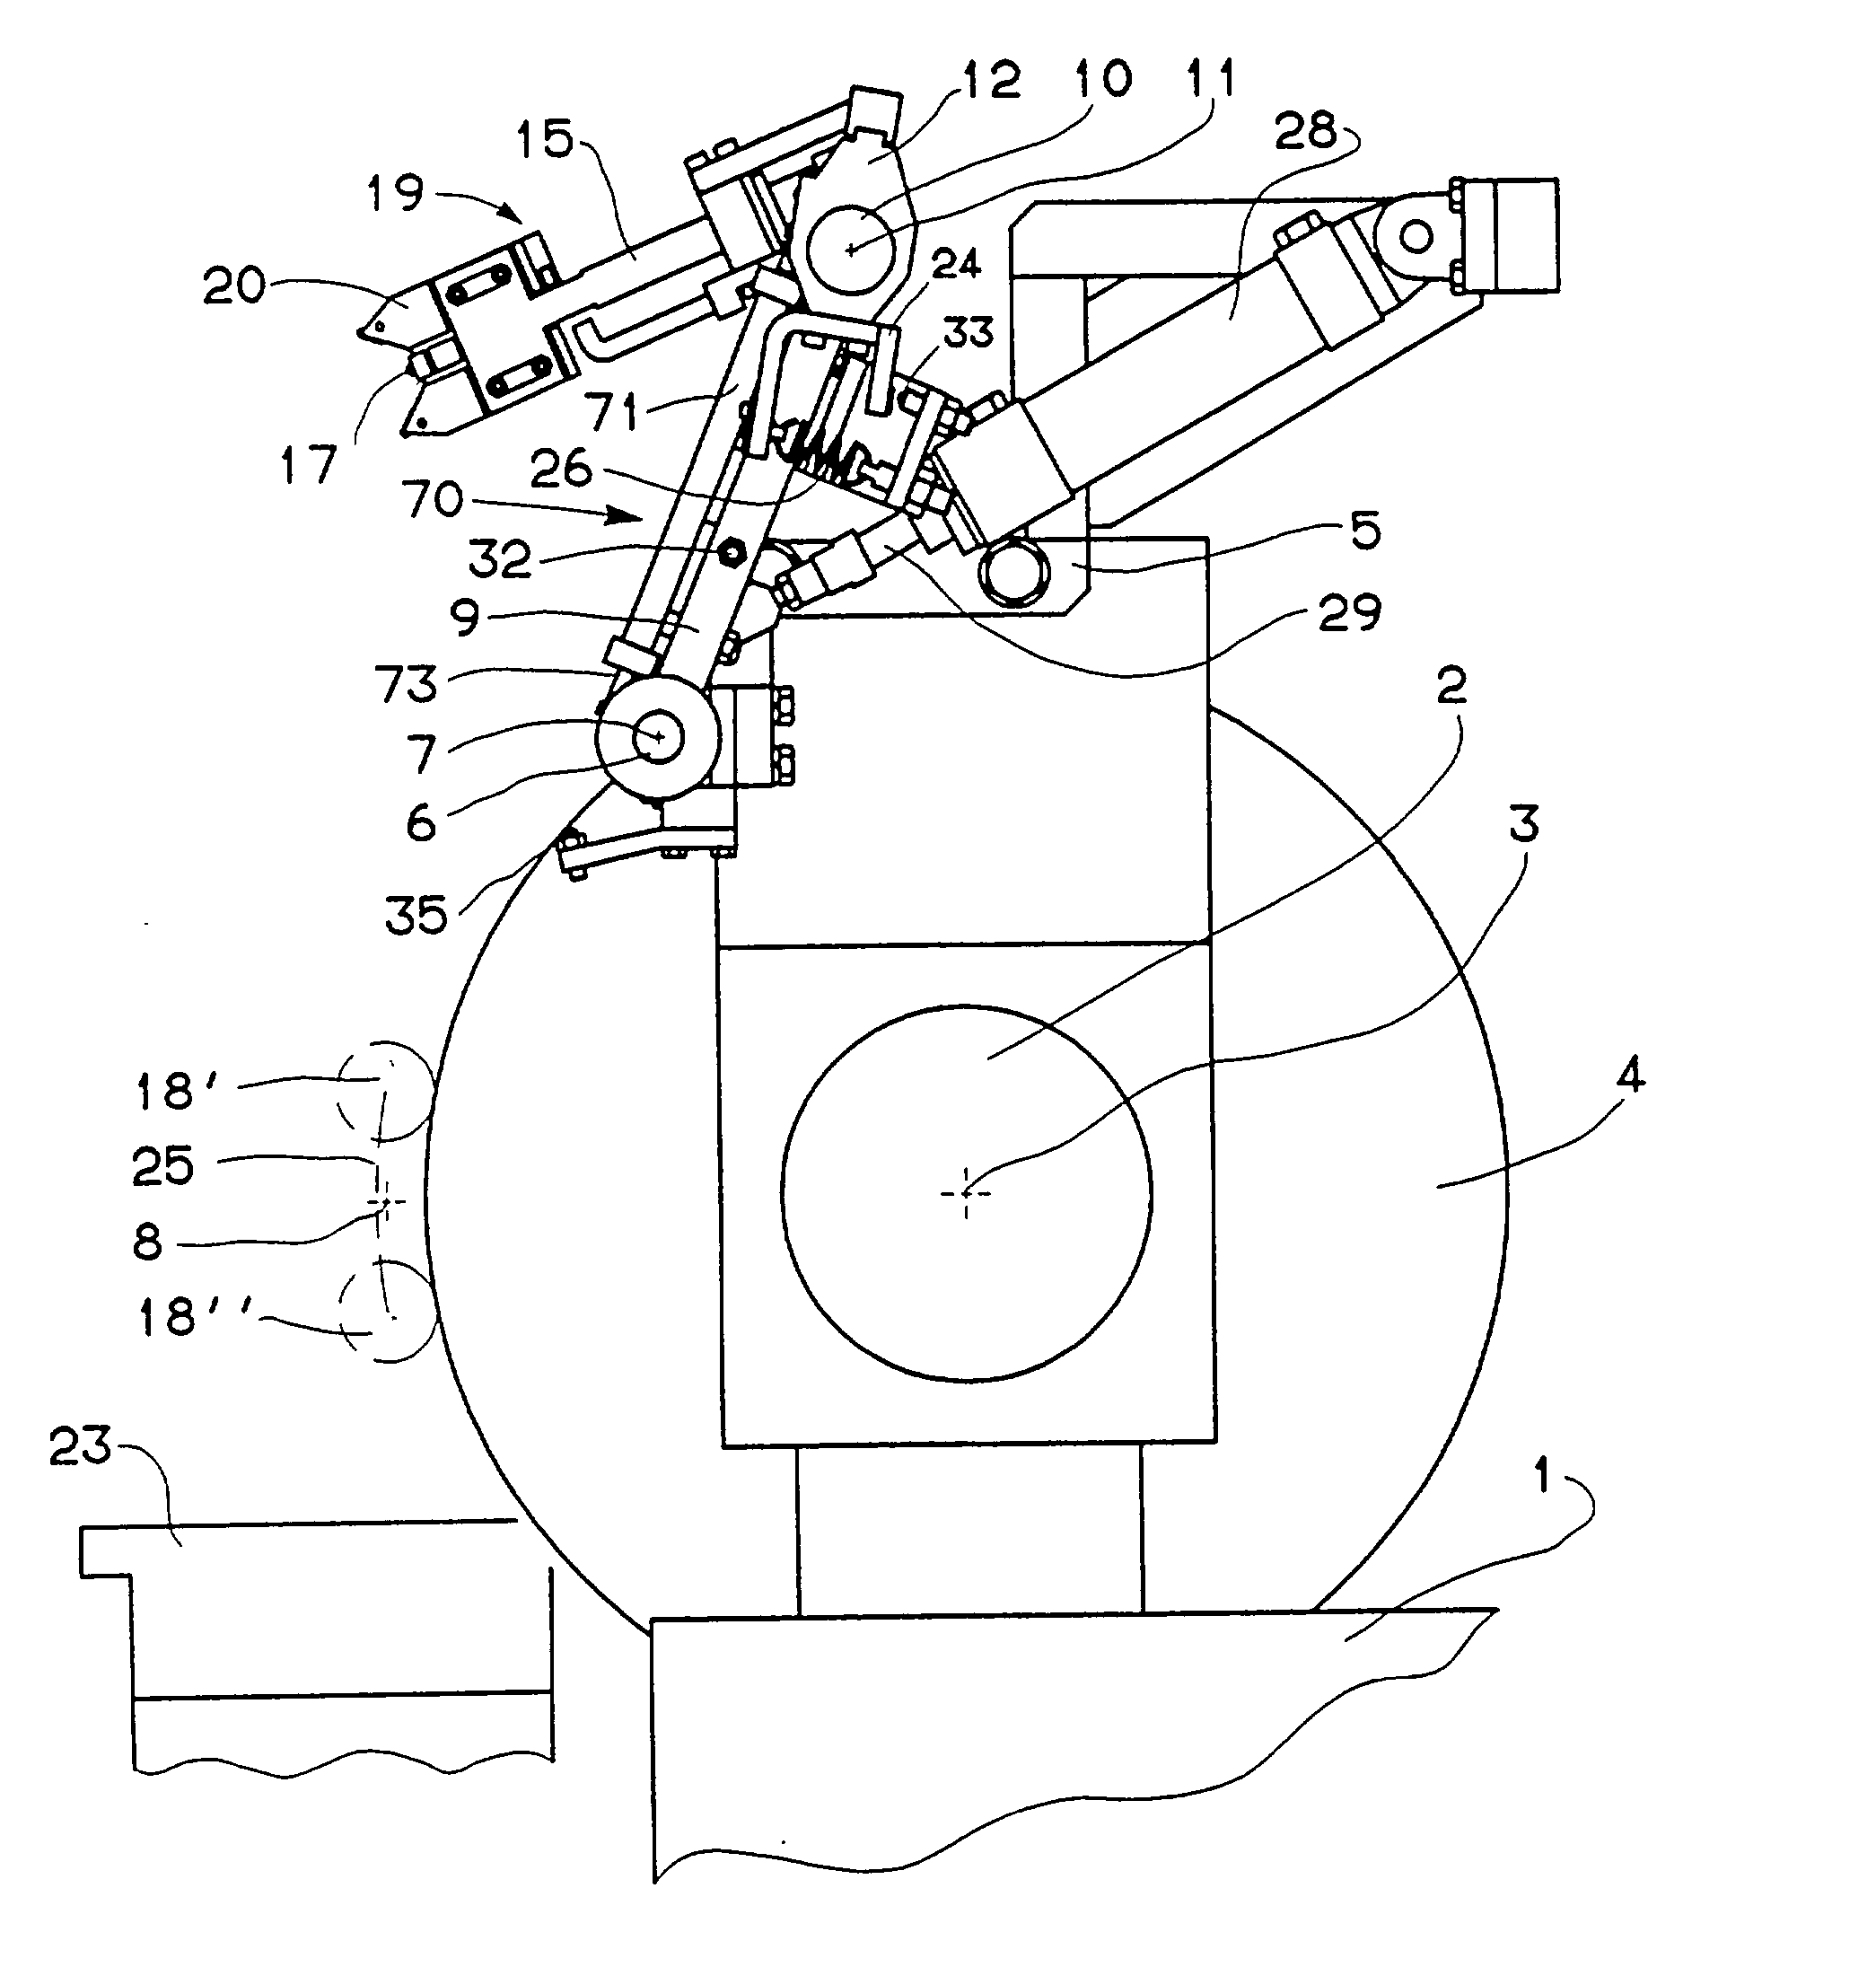 Apparatus for the in-process dimensional checking of cylindrical parts